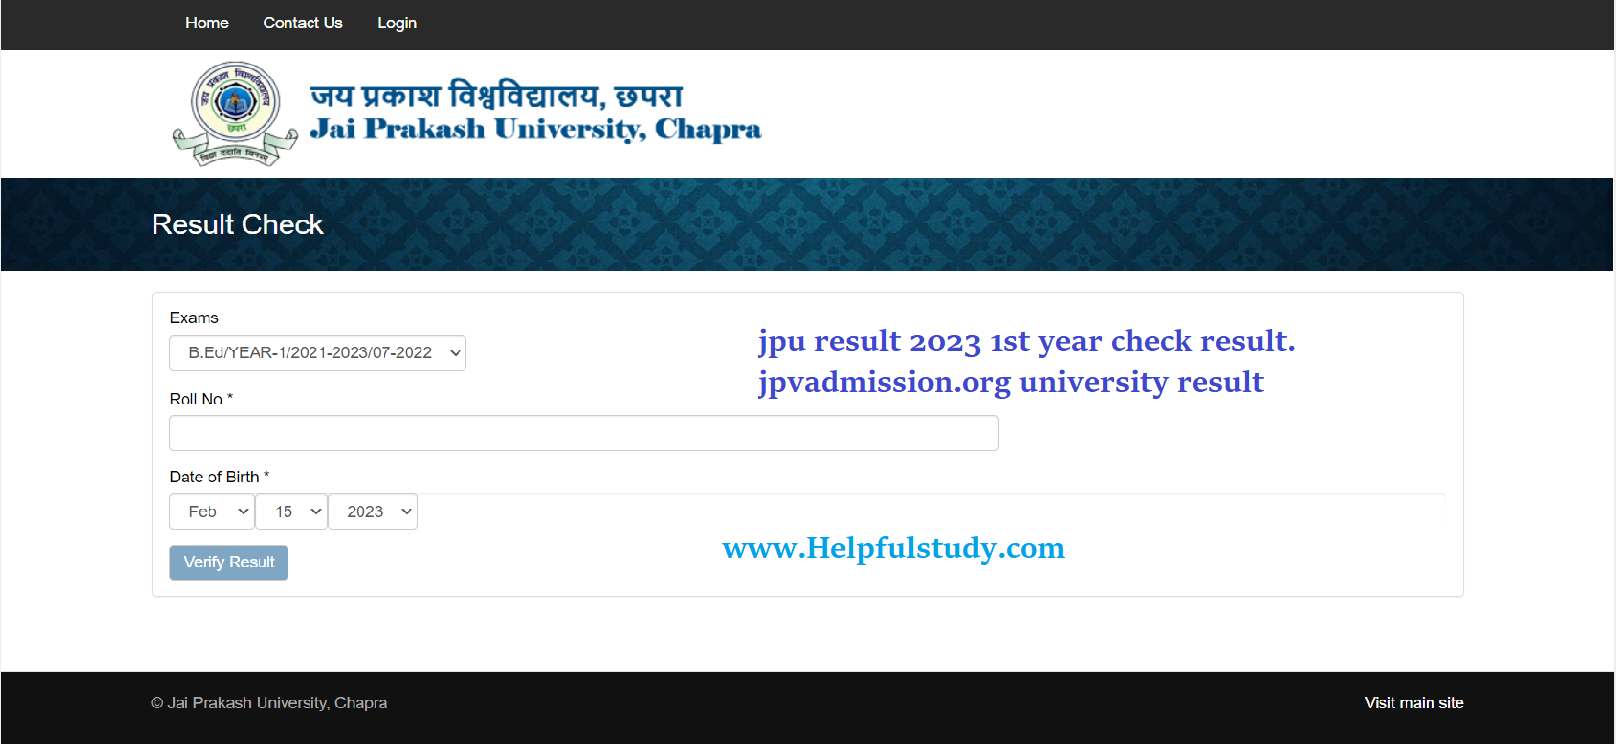 jpu result 2023 1st year check result | jpvadmission.org